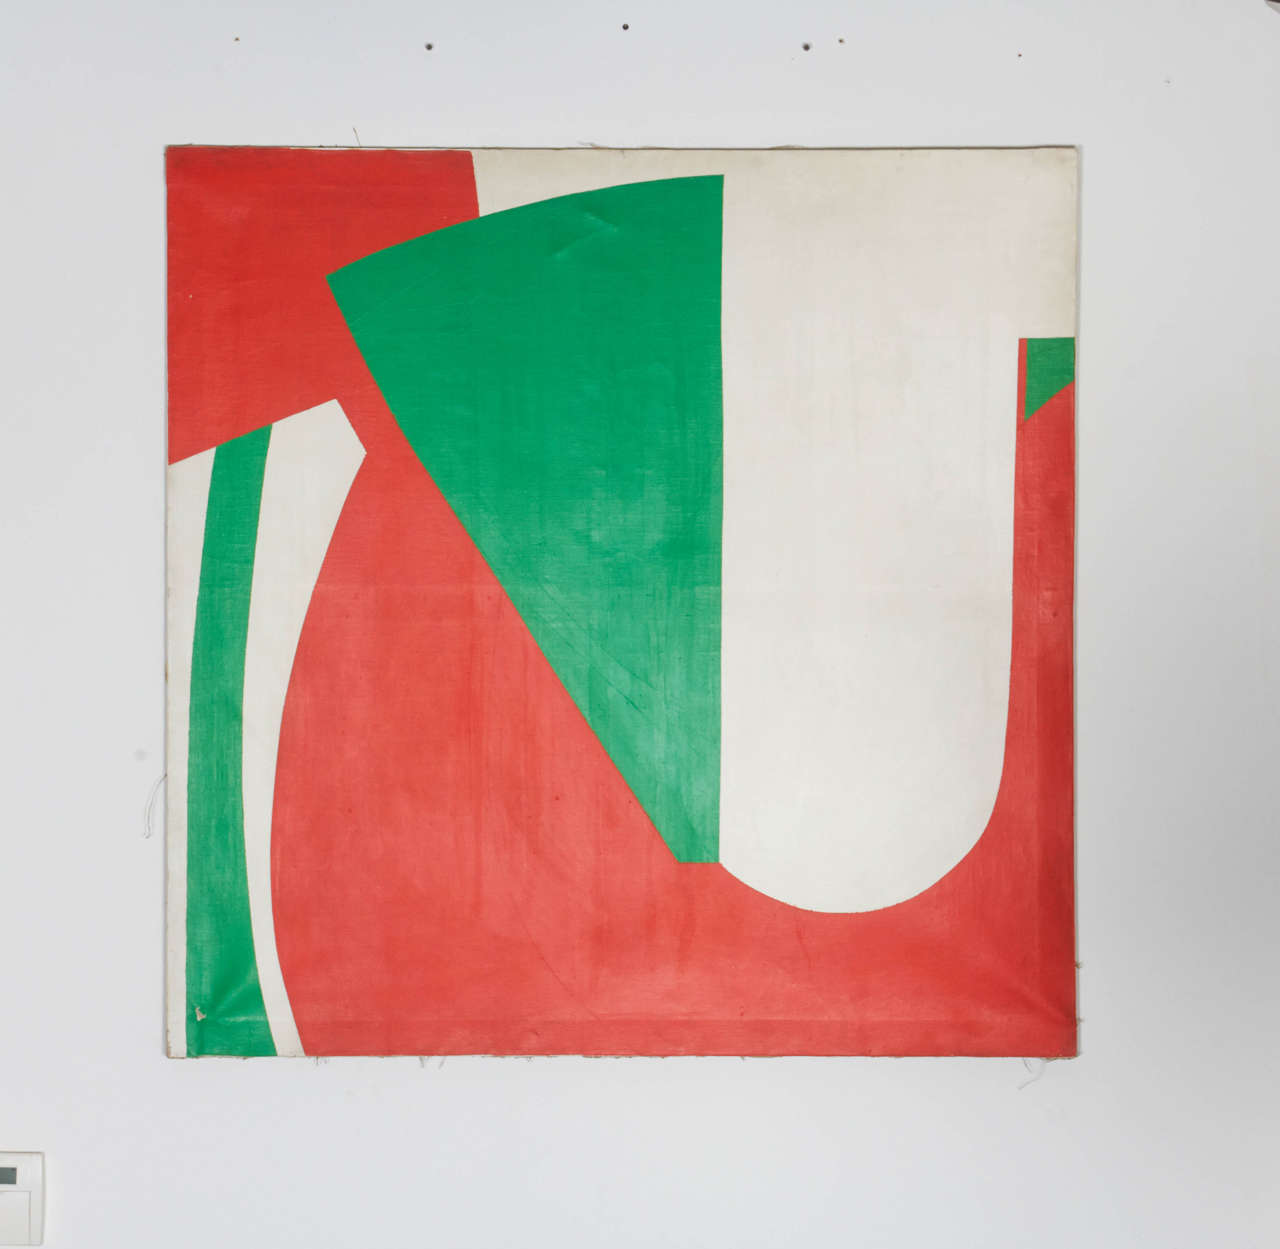 Gino Cosentino (1916-2005) was born in Catania and worked and lived in Milan for the rest of his life. He exhibited frequently which culminated in 1975 in an exhibit at the Rotonda della Besana, organized by the Municipality of Milan which earned